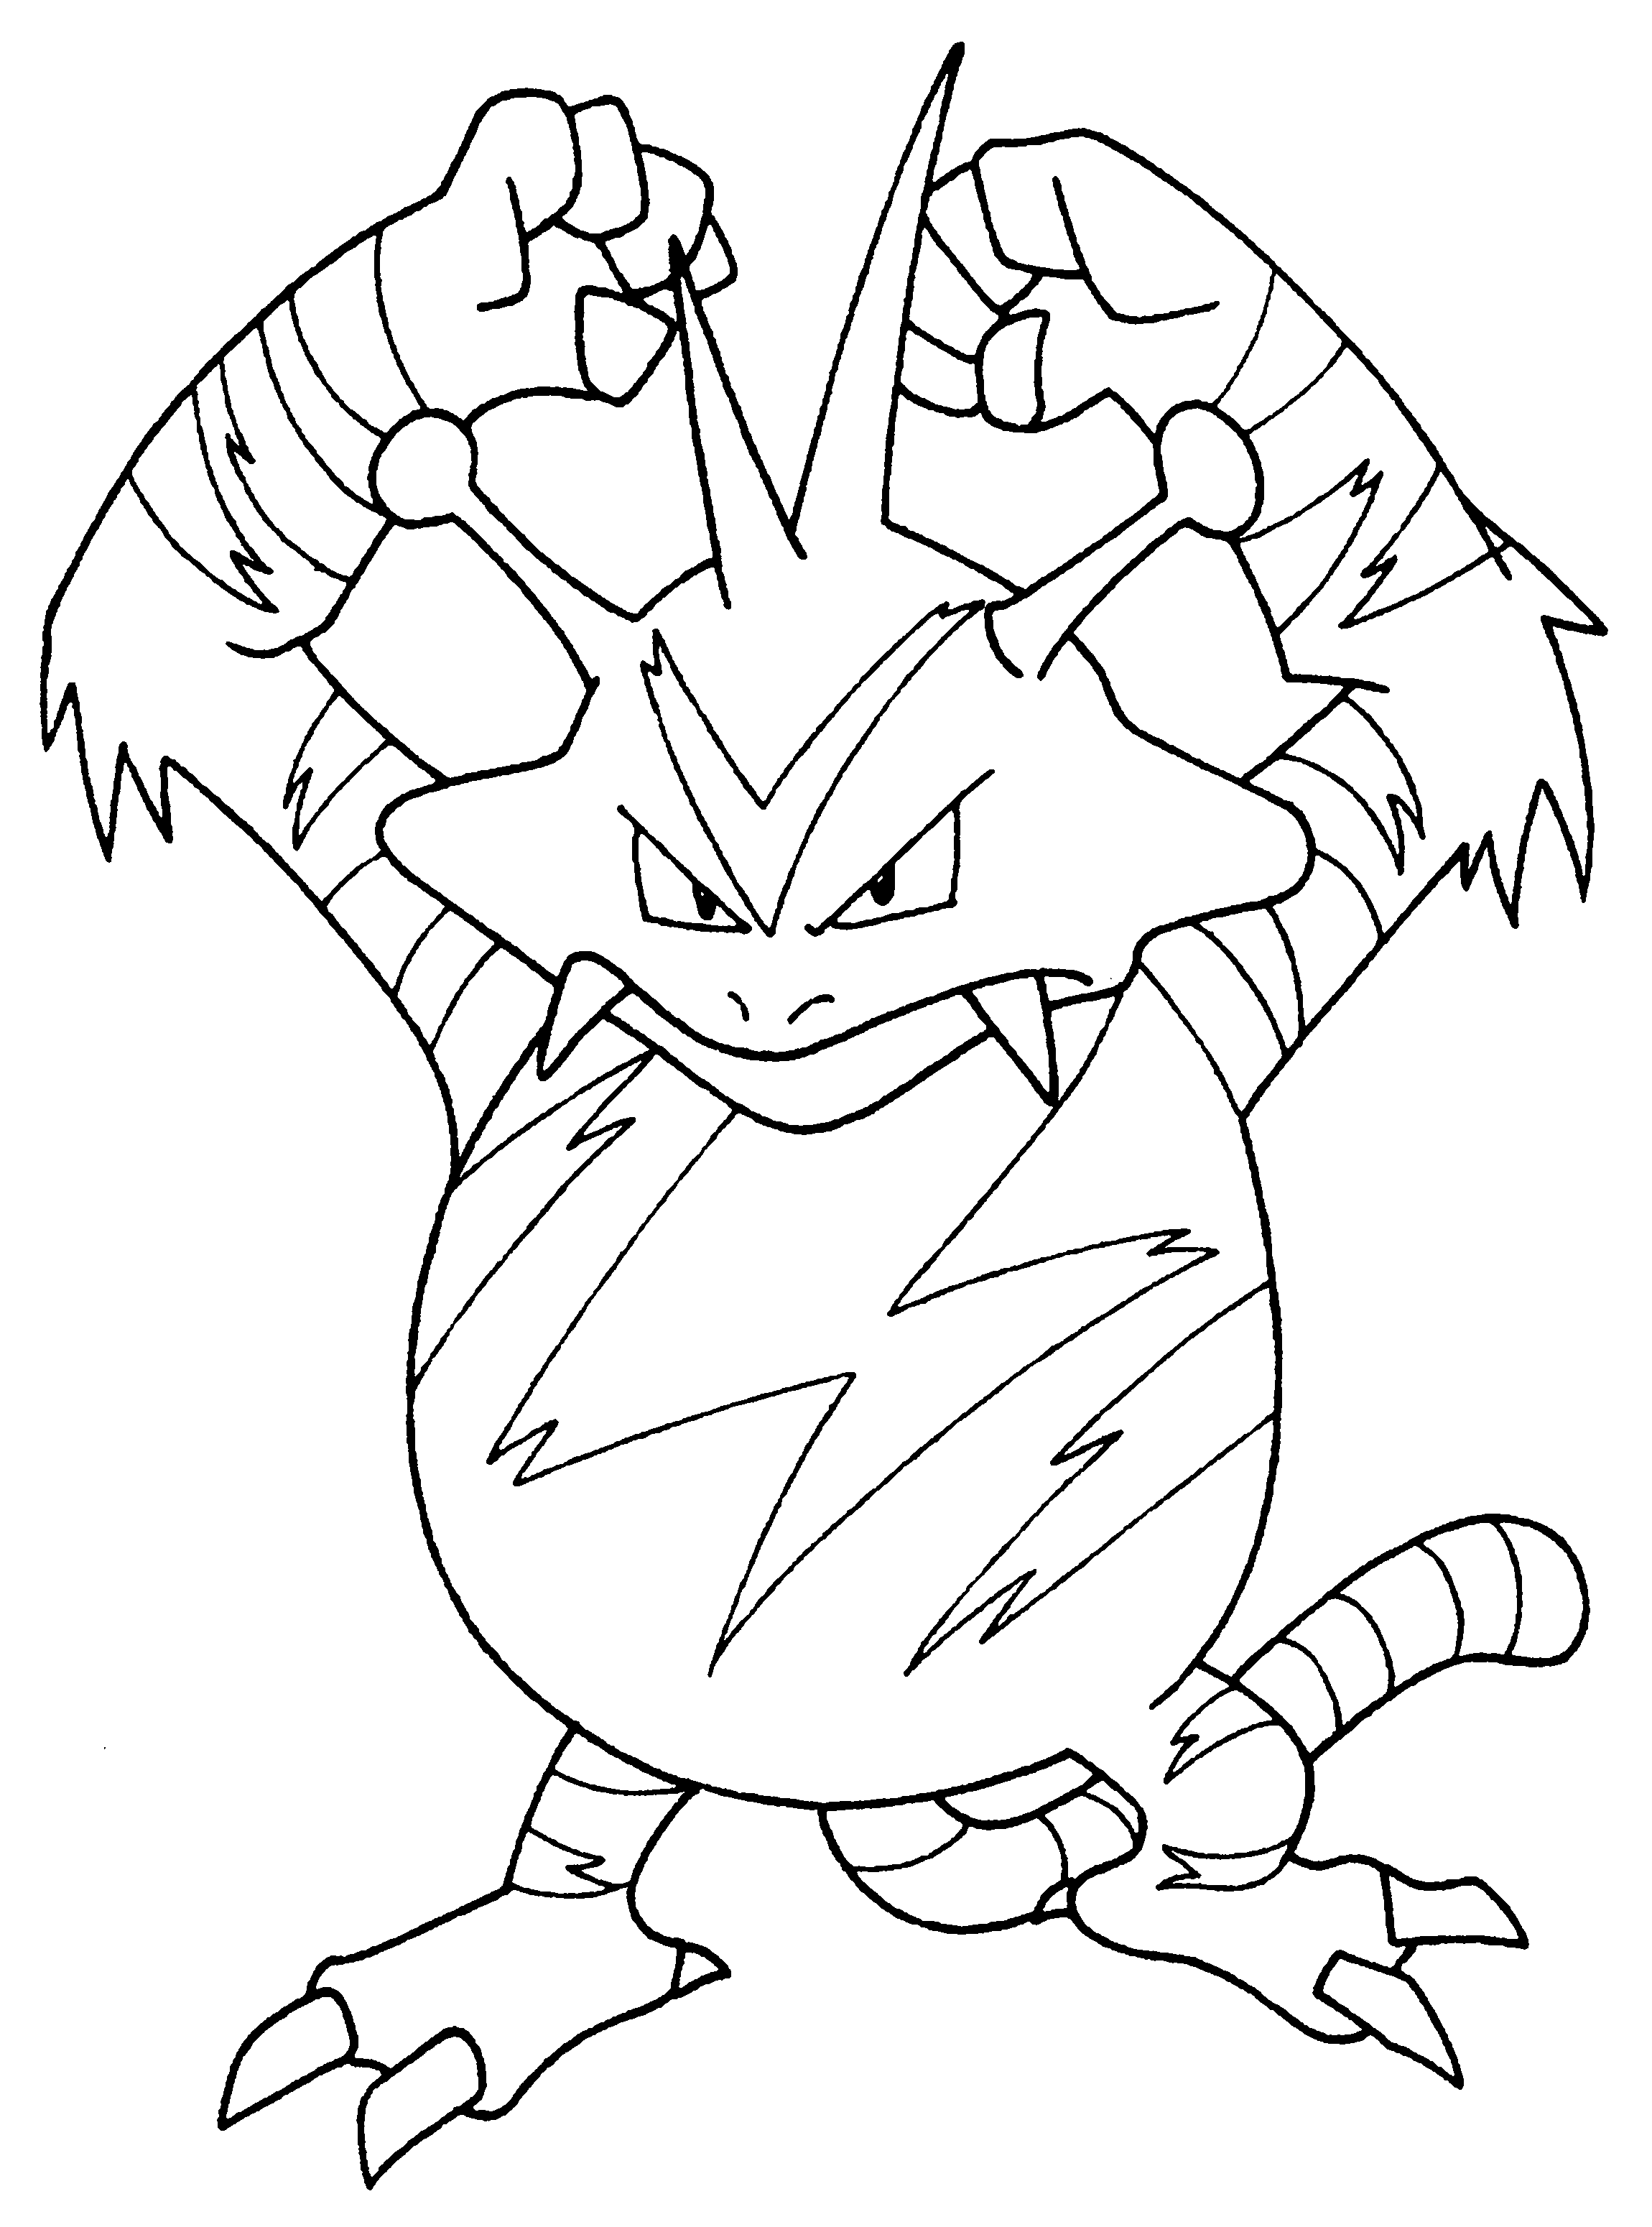 All legendary pokemon coloring pages